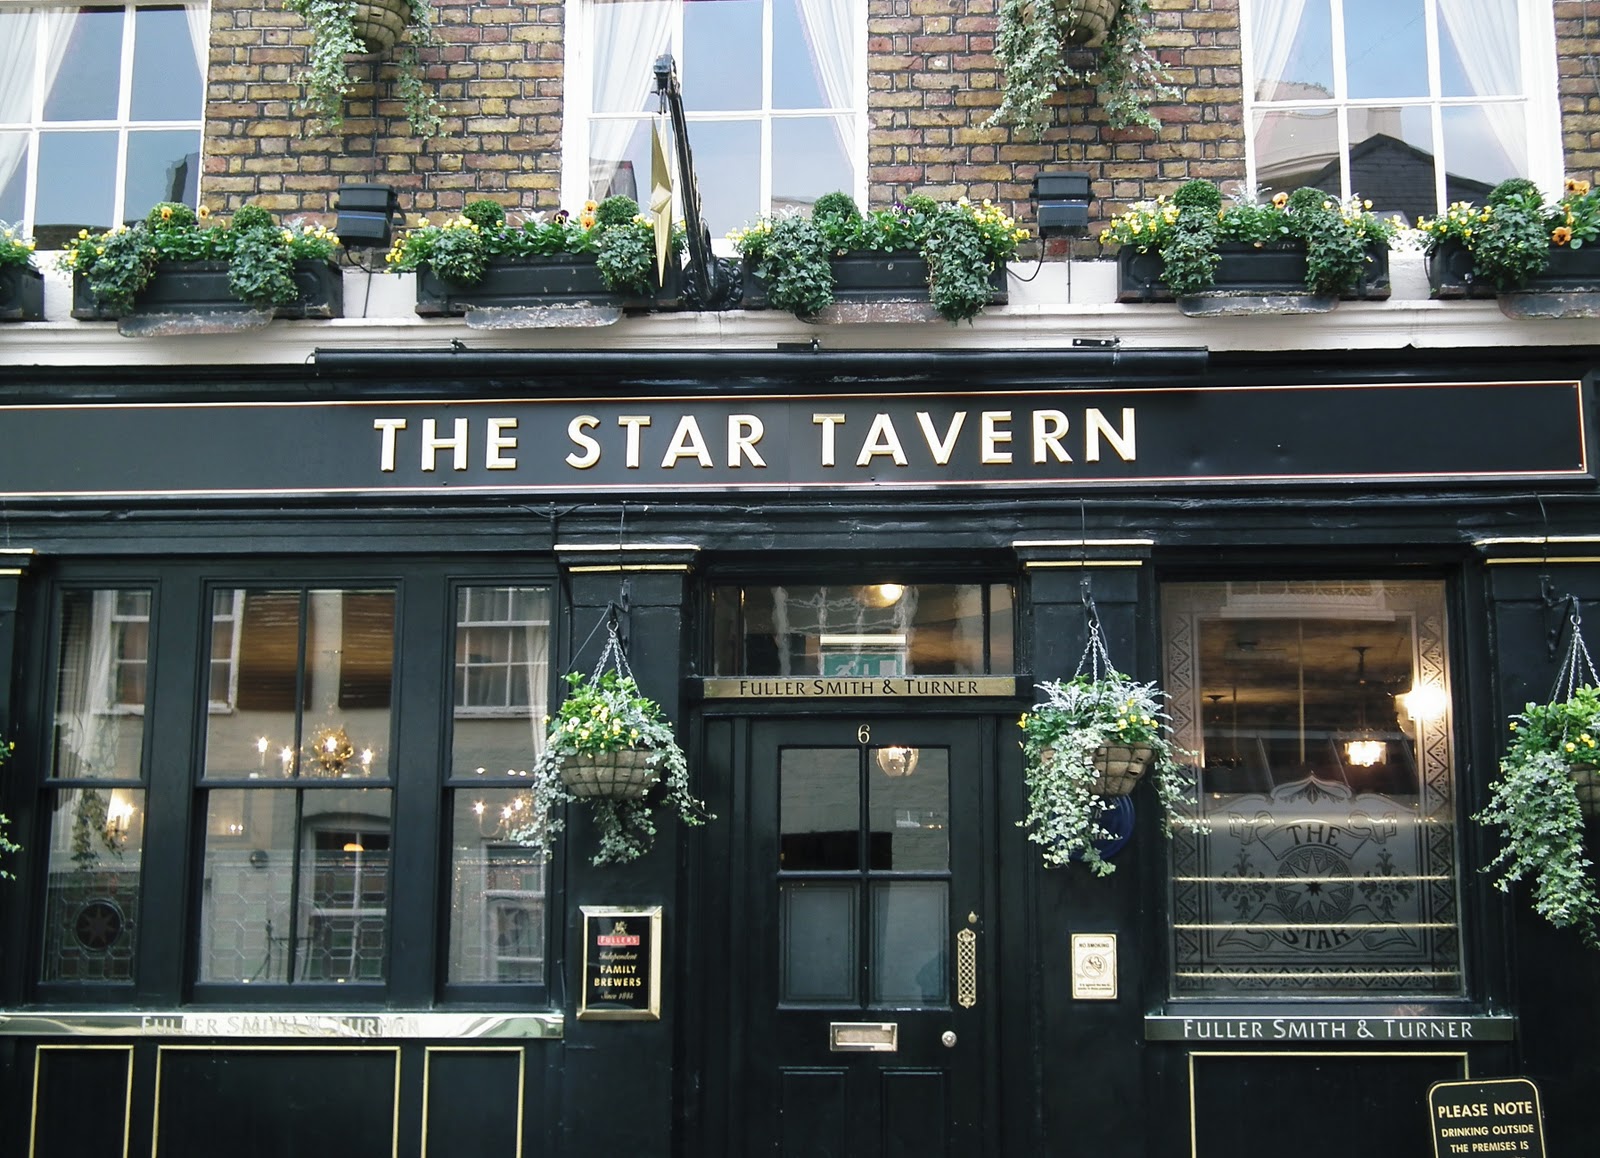 The Things I Enjoy: The future of the British pub